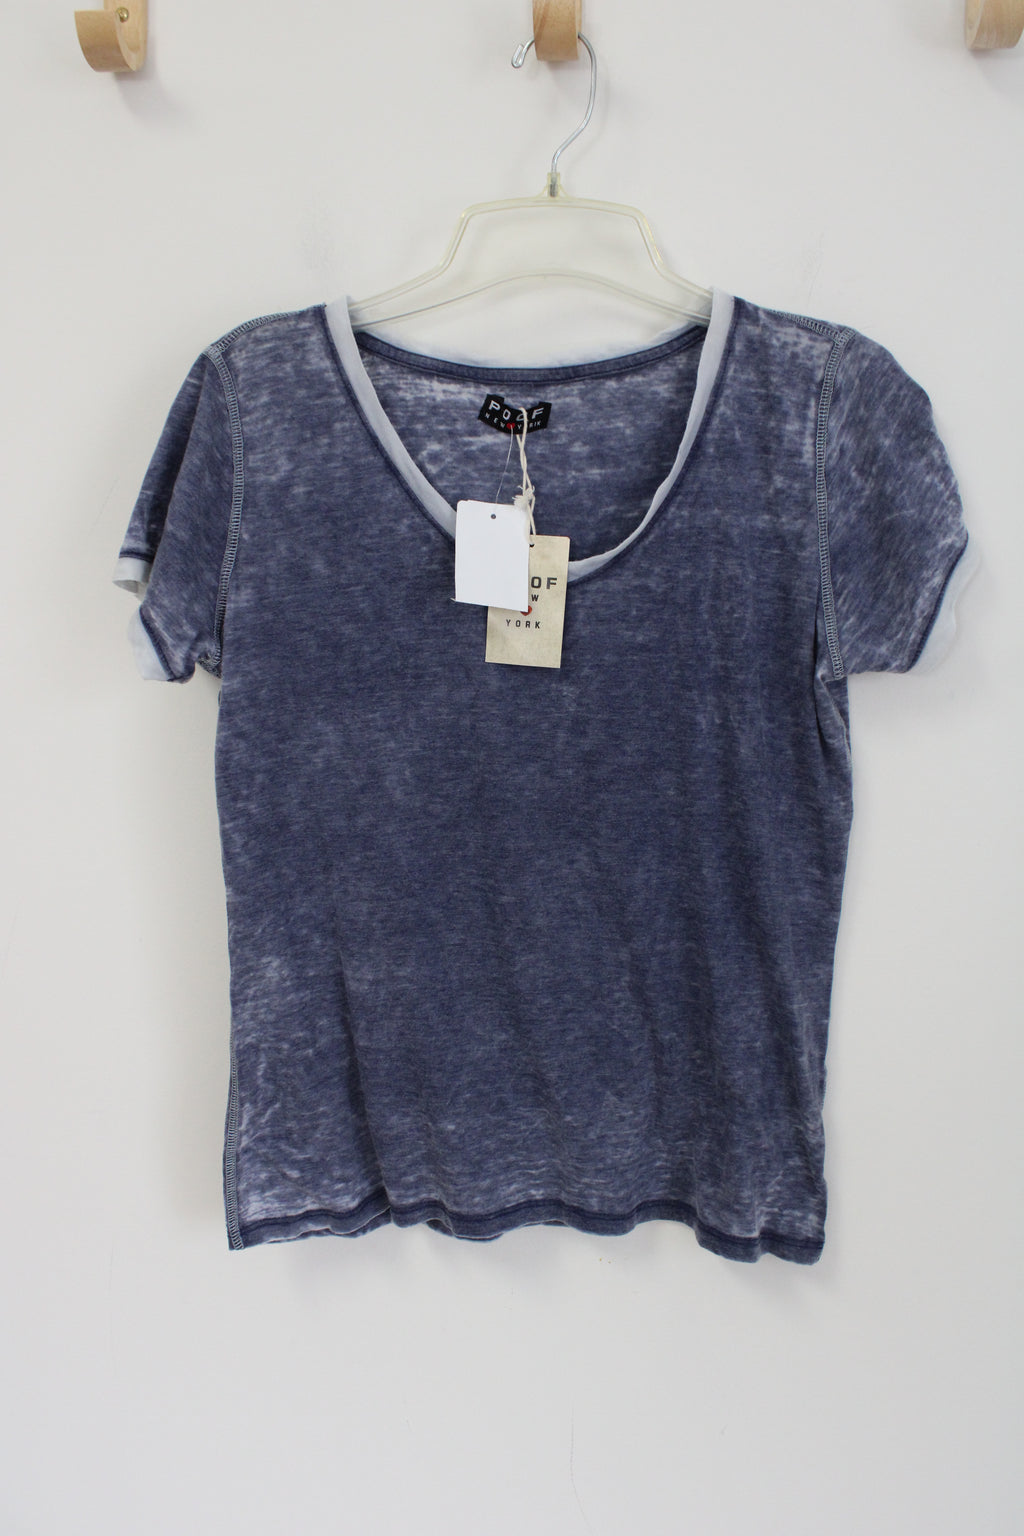 NEW Poof Blue Tee | M